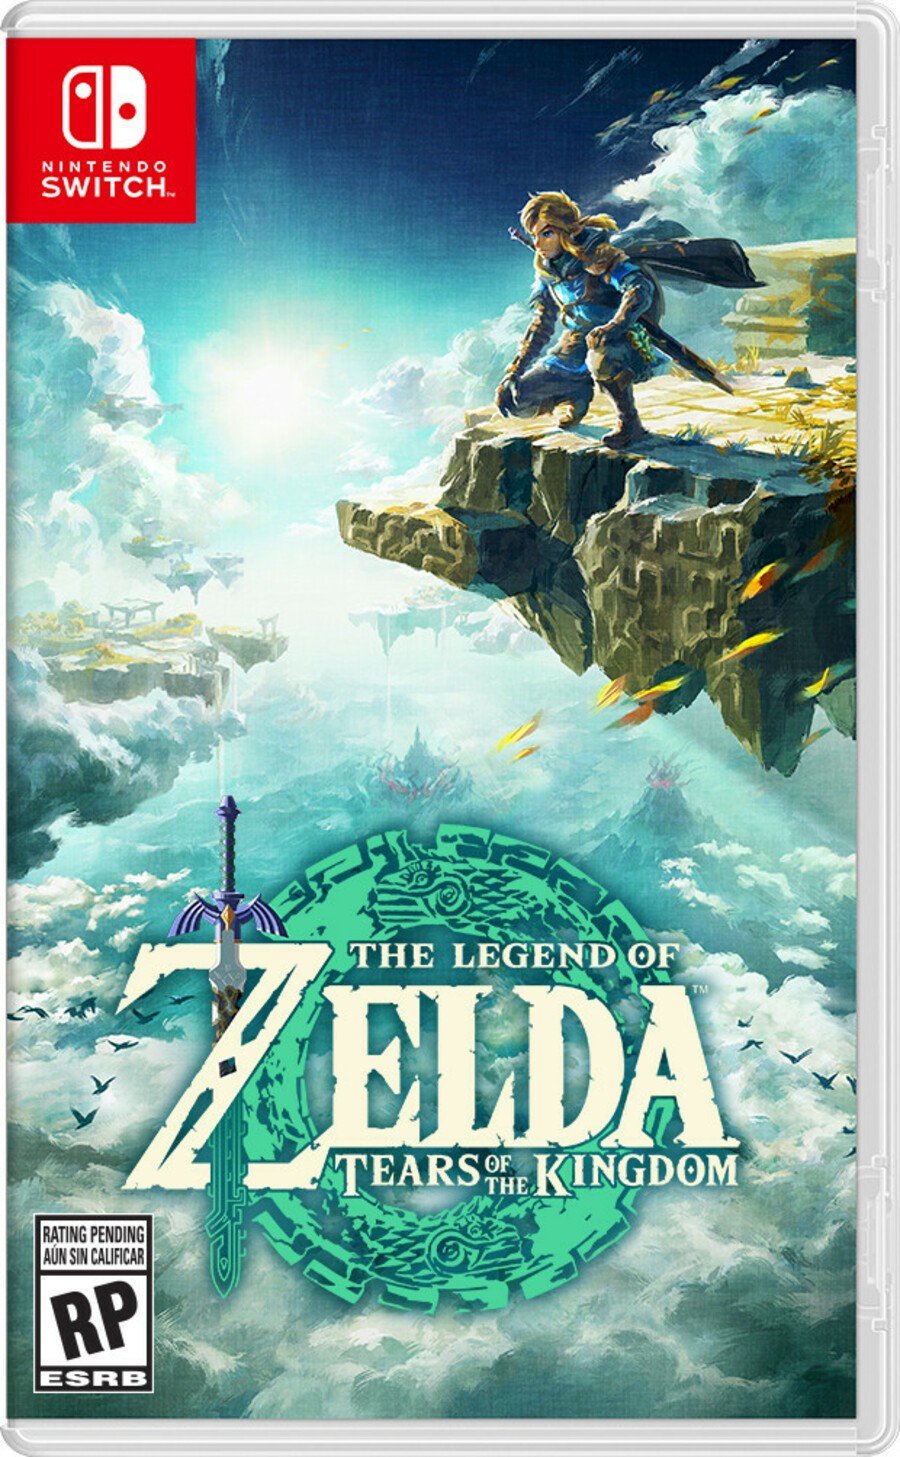 Here's A Look At The Stunning Box Art For Zelda: Tears Of The Kingdom